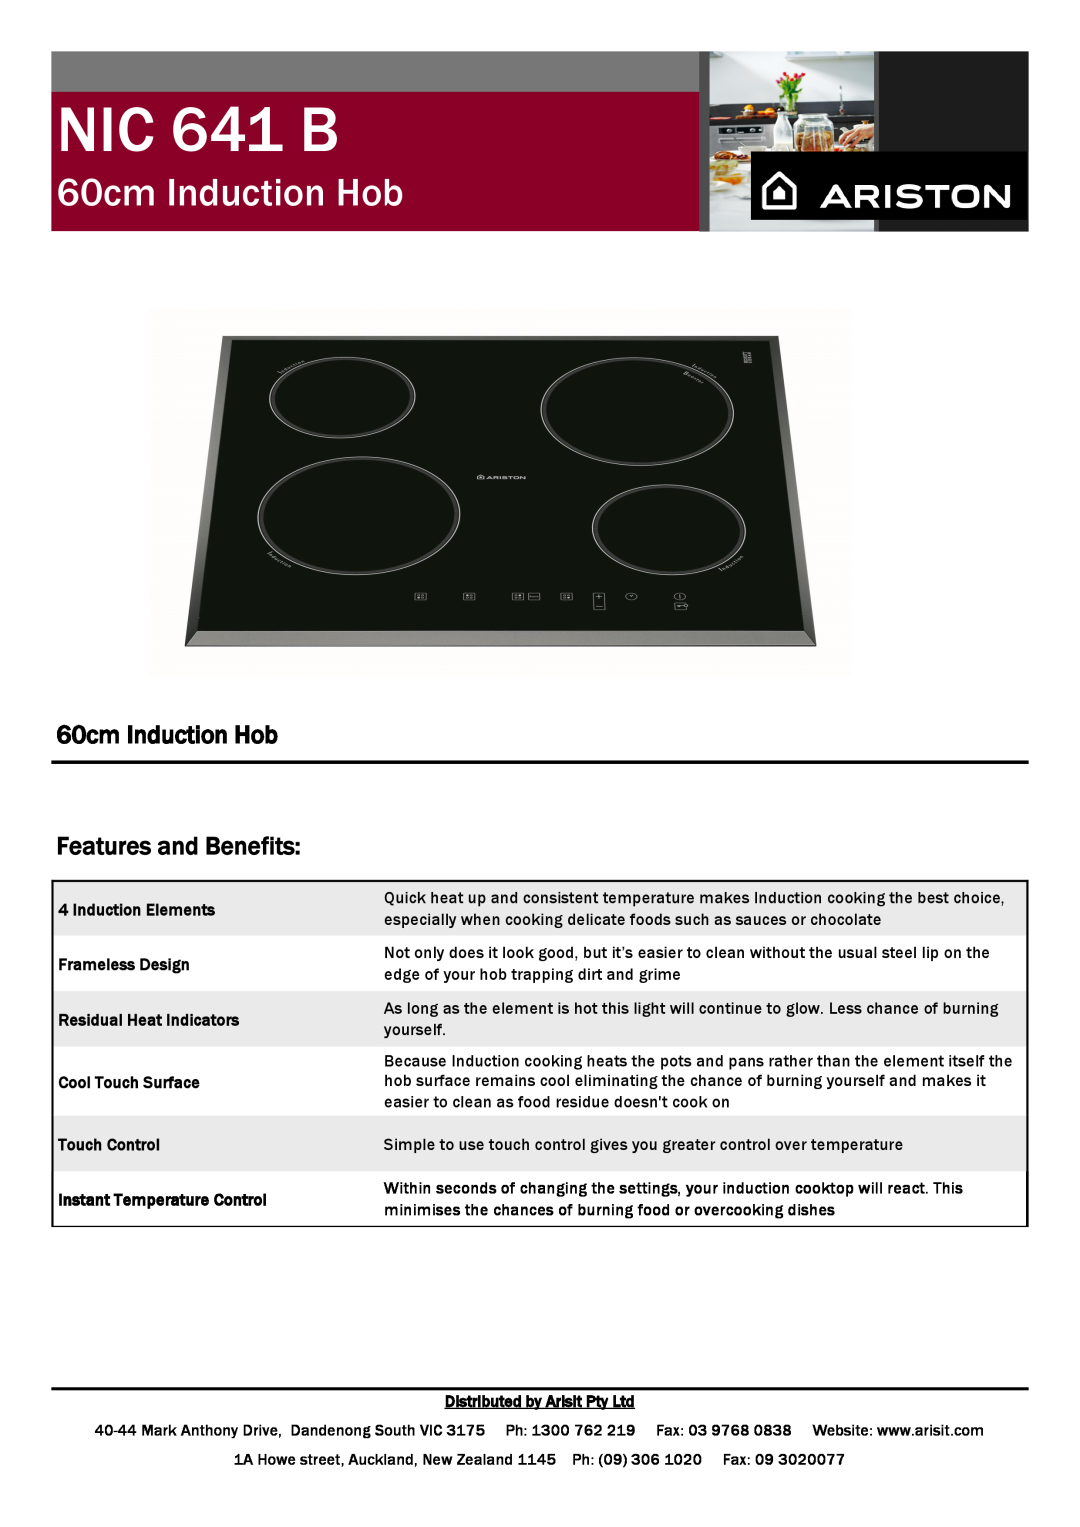 Ariston NIC 641 B manual 60cm Induction Hob Features and Benefits, Induction Elements Frameless Design 